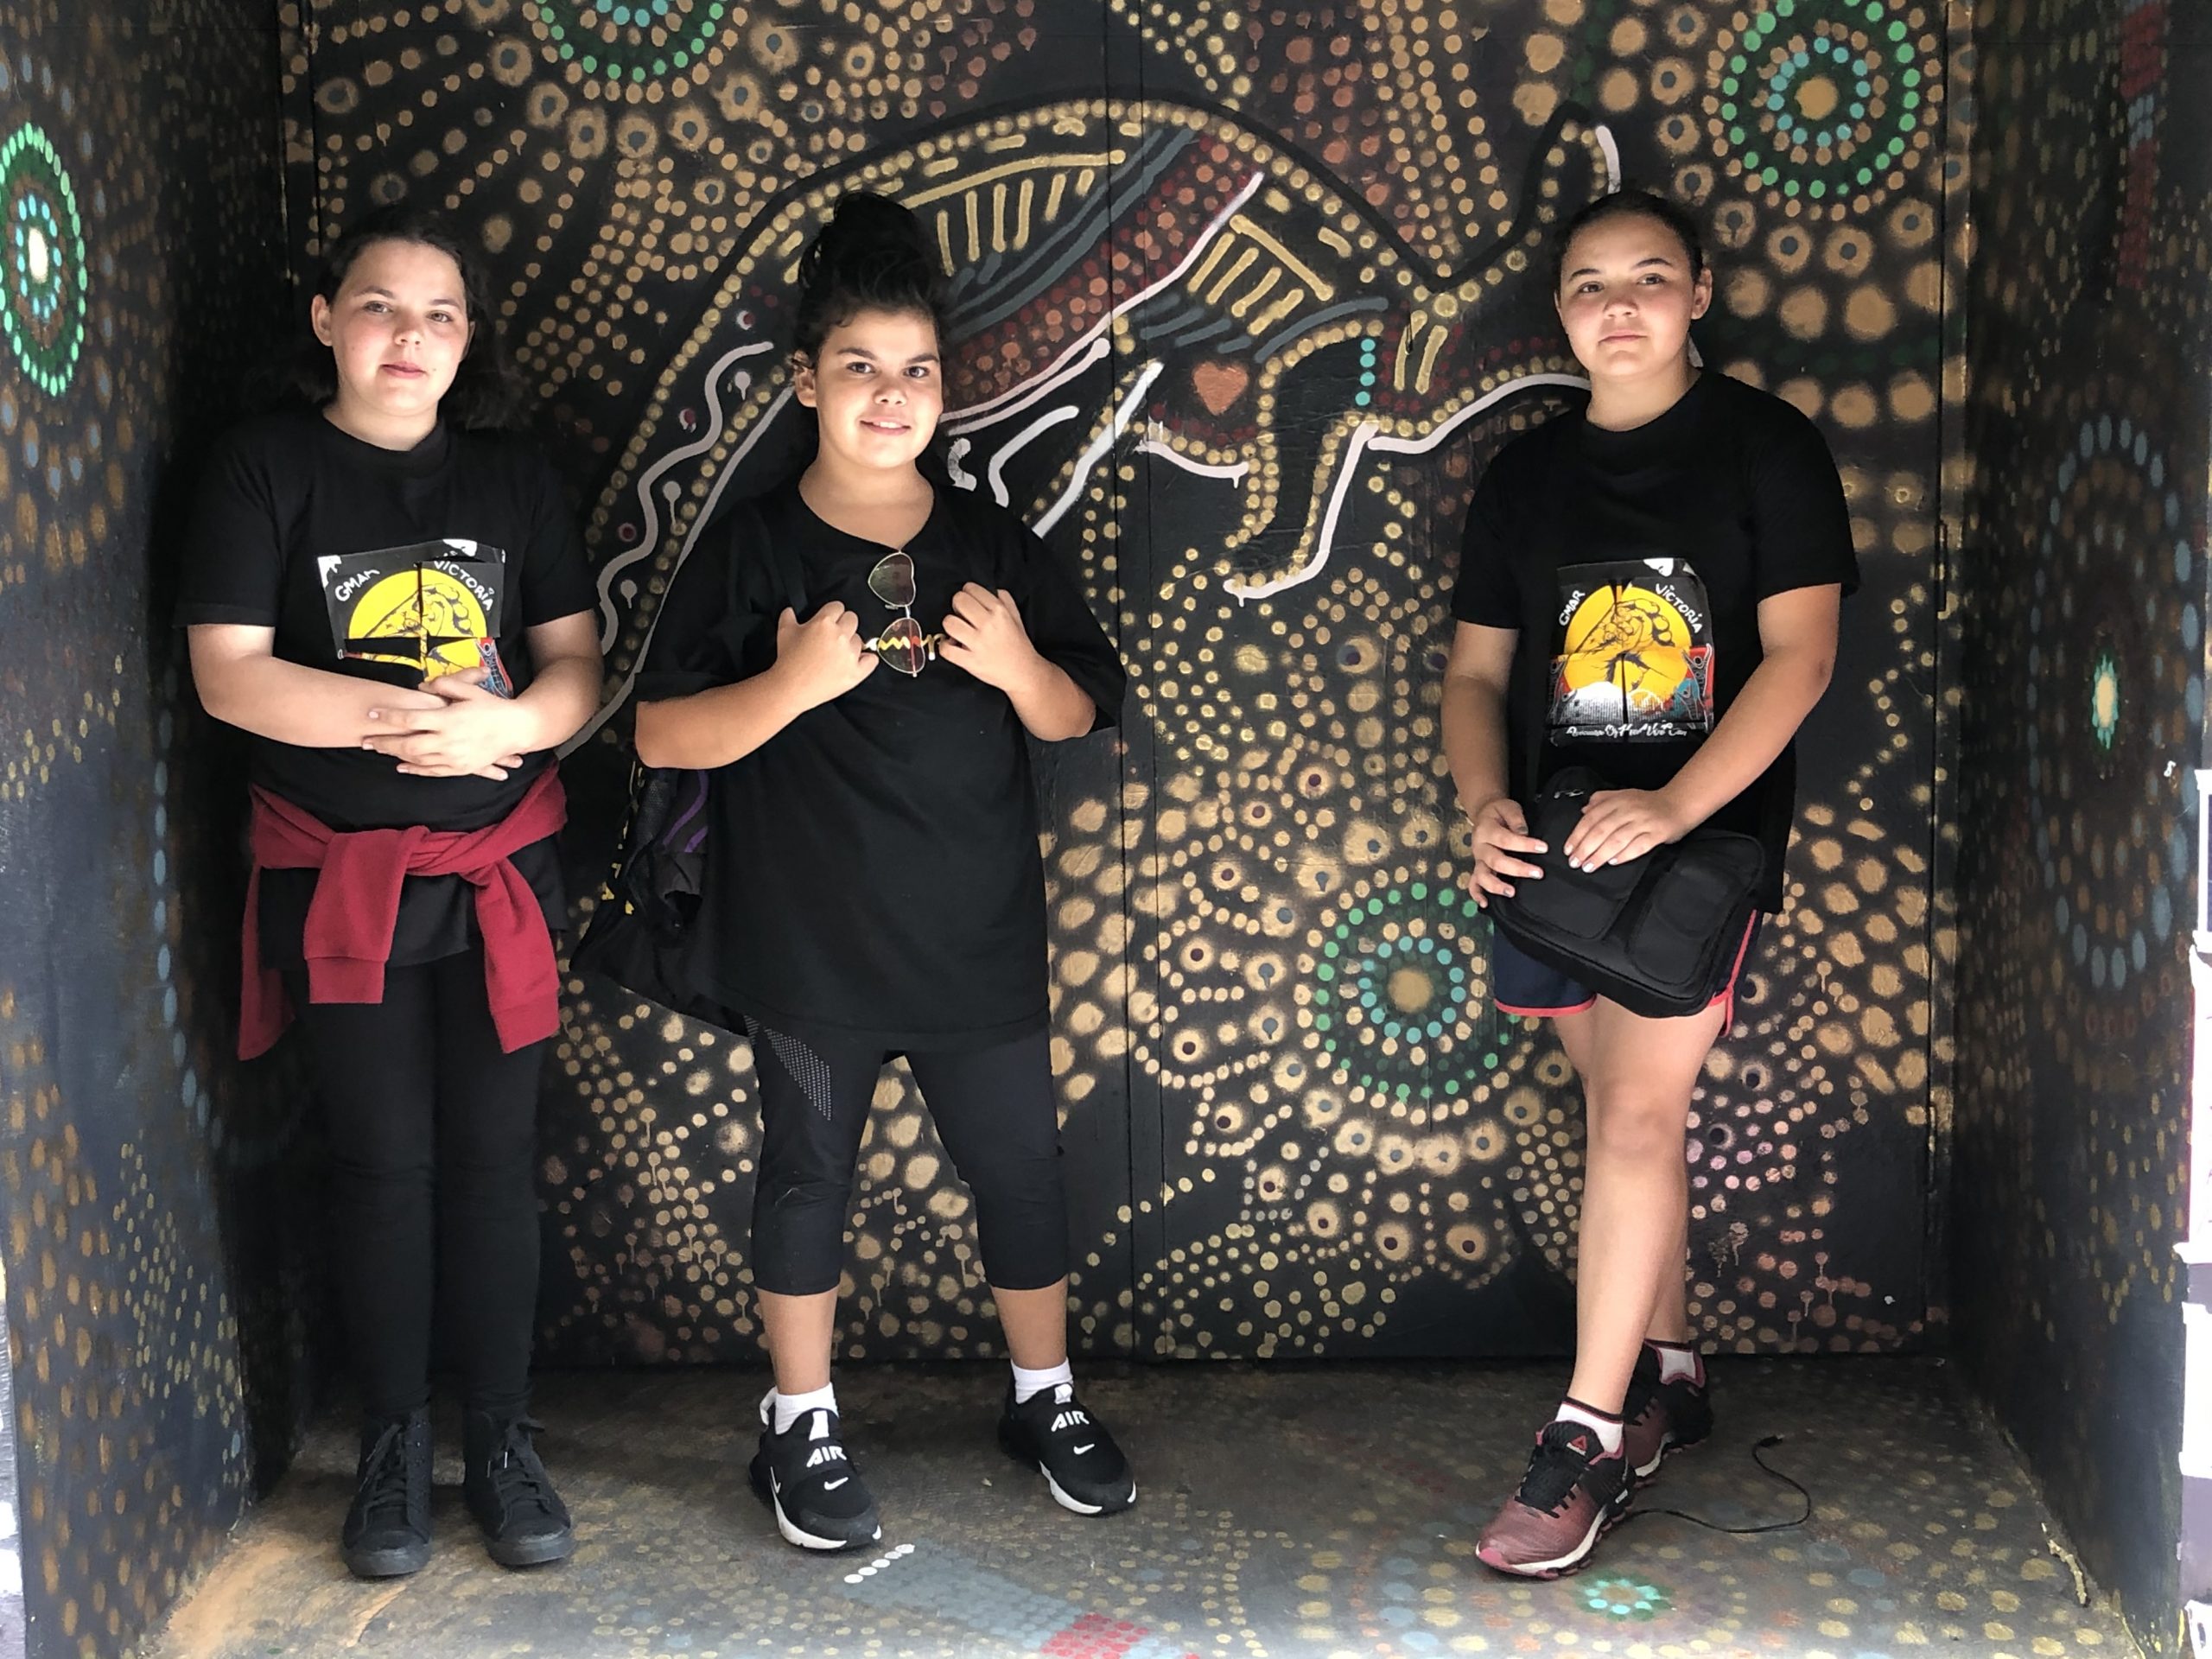 3 girls dressed in black with aboriginal art work in the background